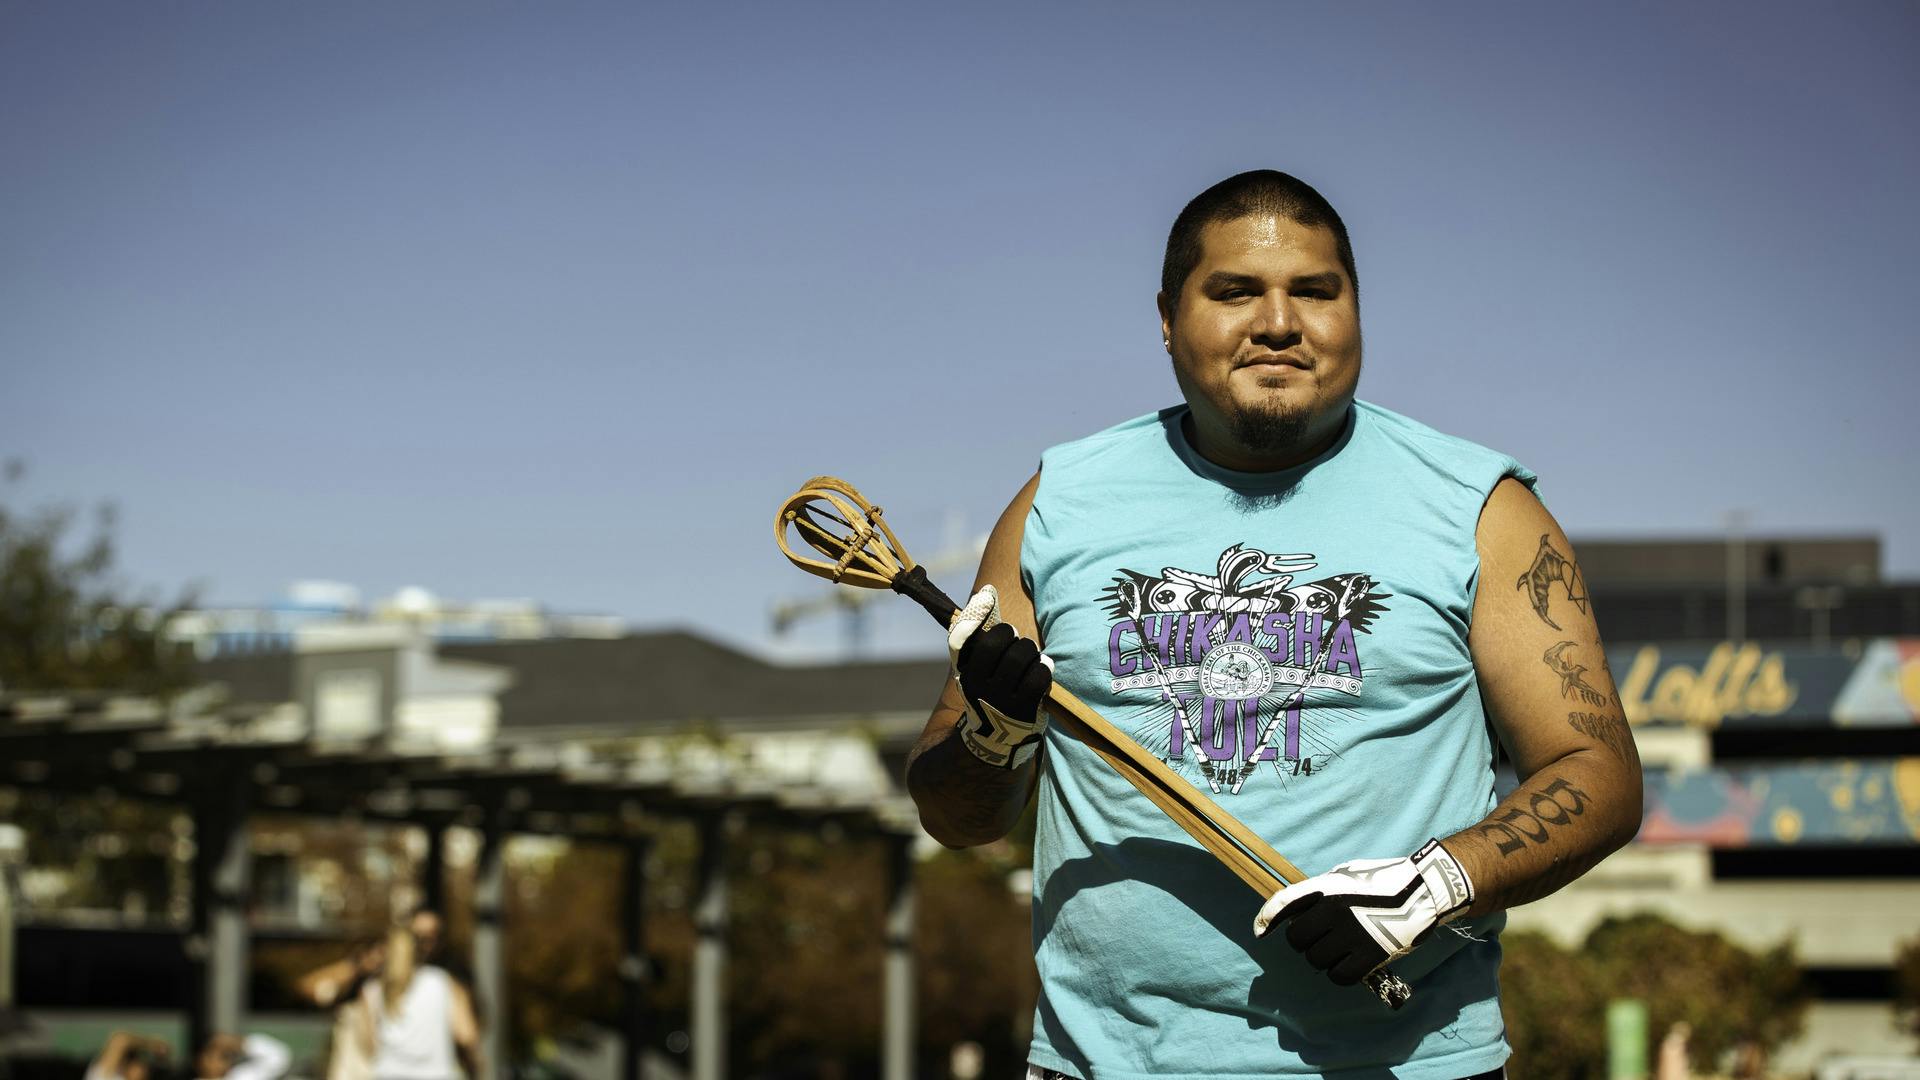 A person stands, holding a toli stick and smiling for the camera.